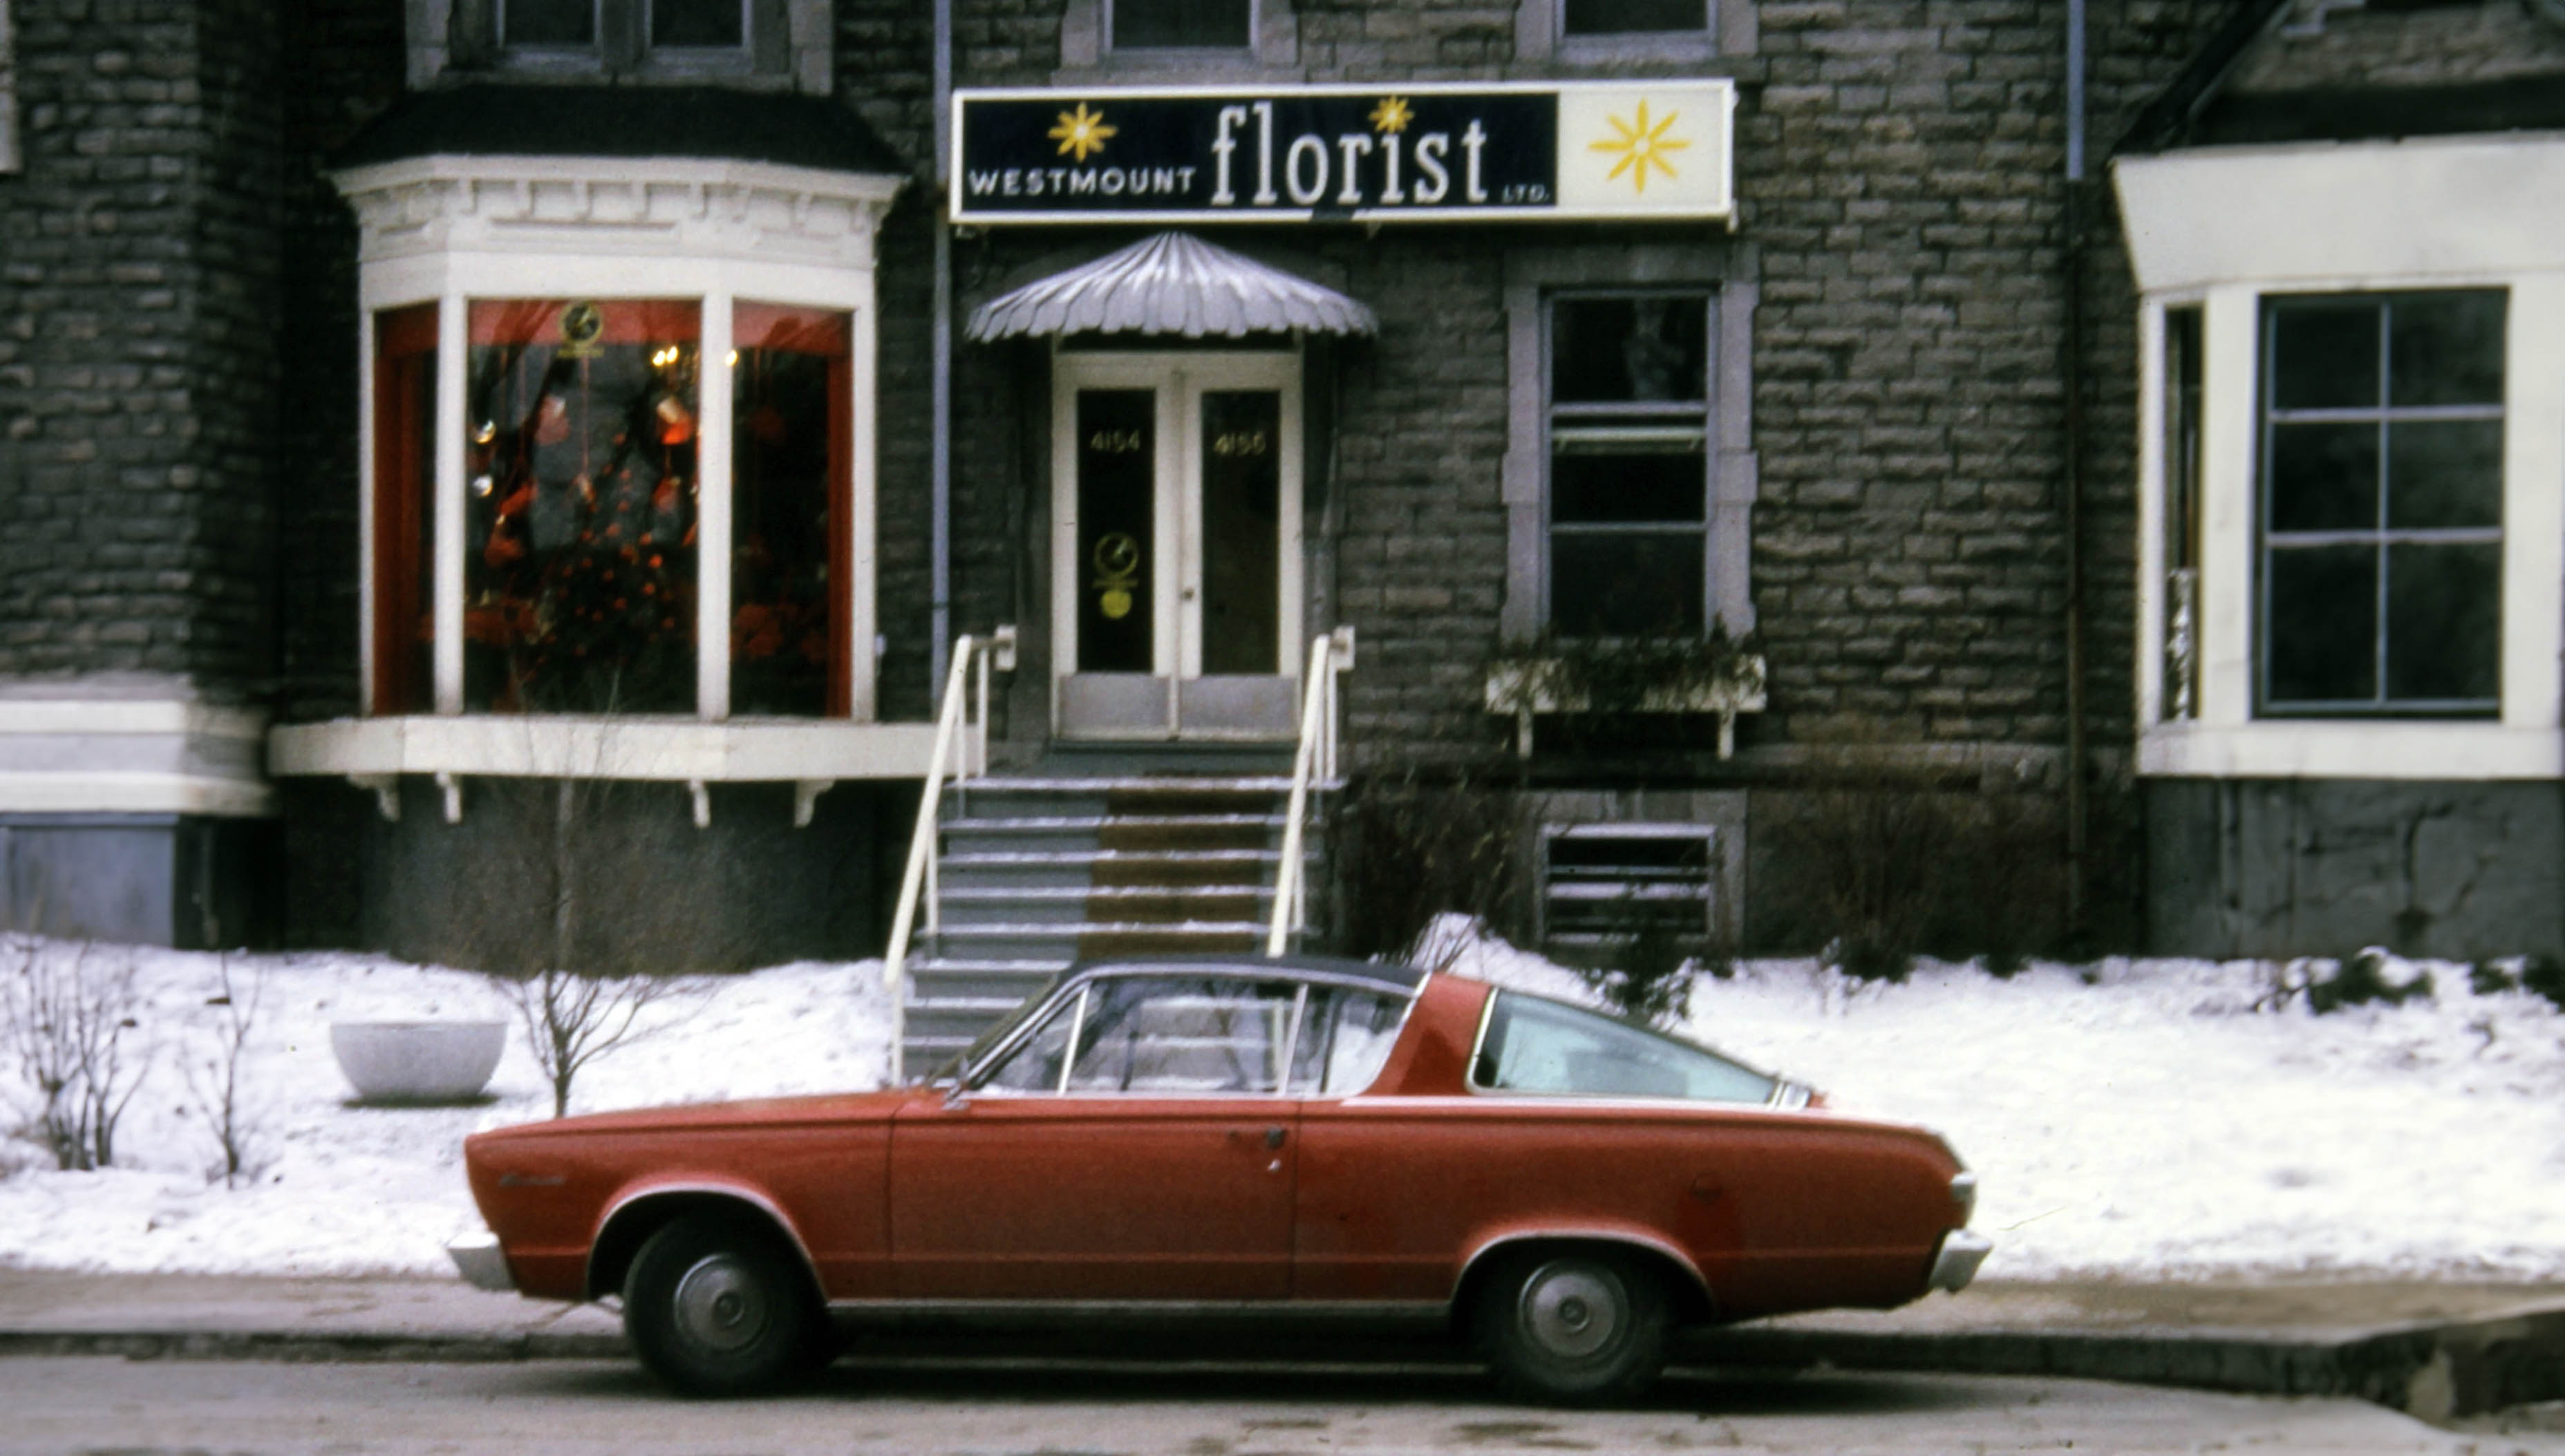 Old photo of vintage car parked in front of Westmount florist.